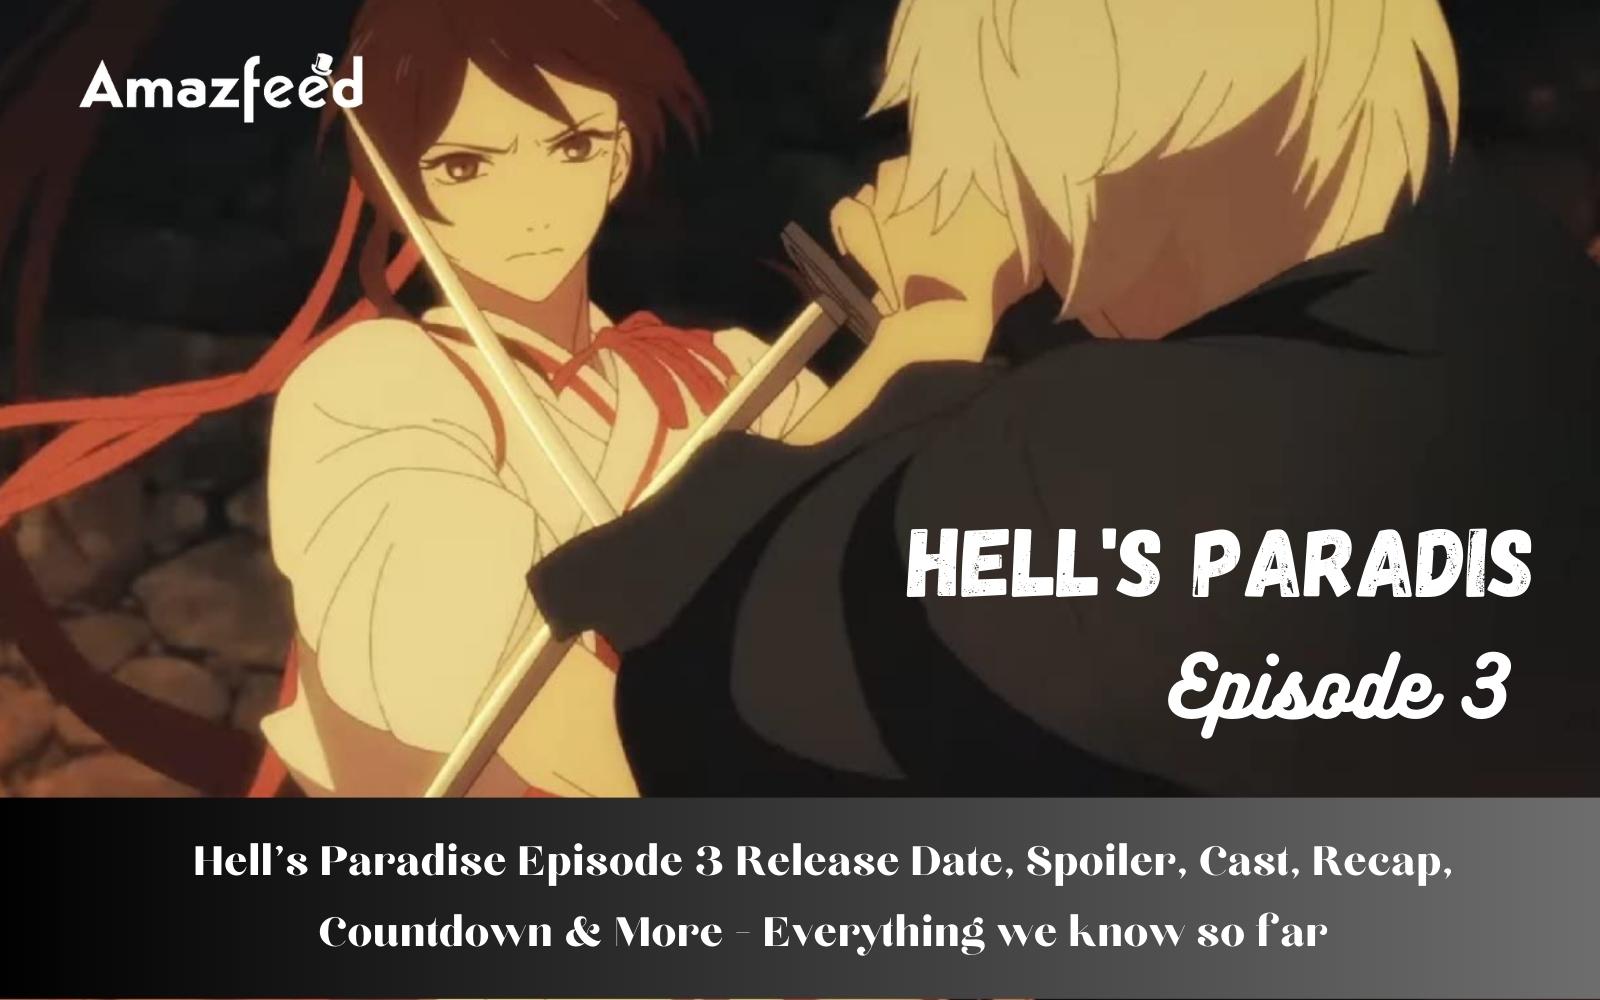 Hell's Paradise episode 4 release time, date and anime recap explored